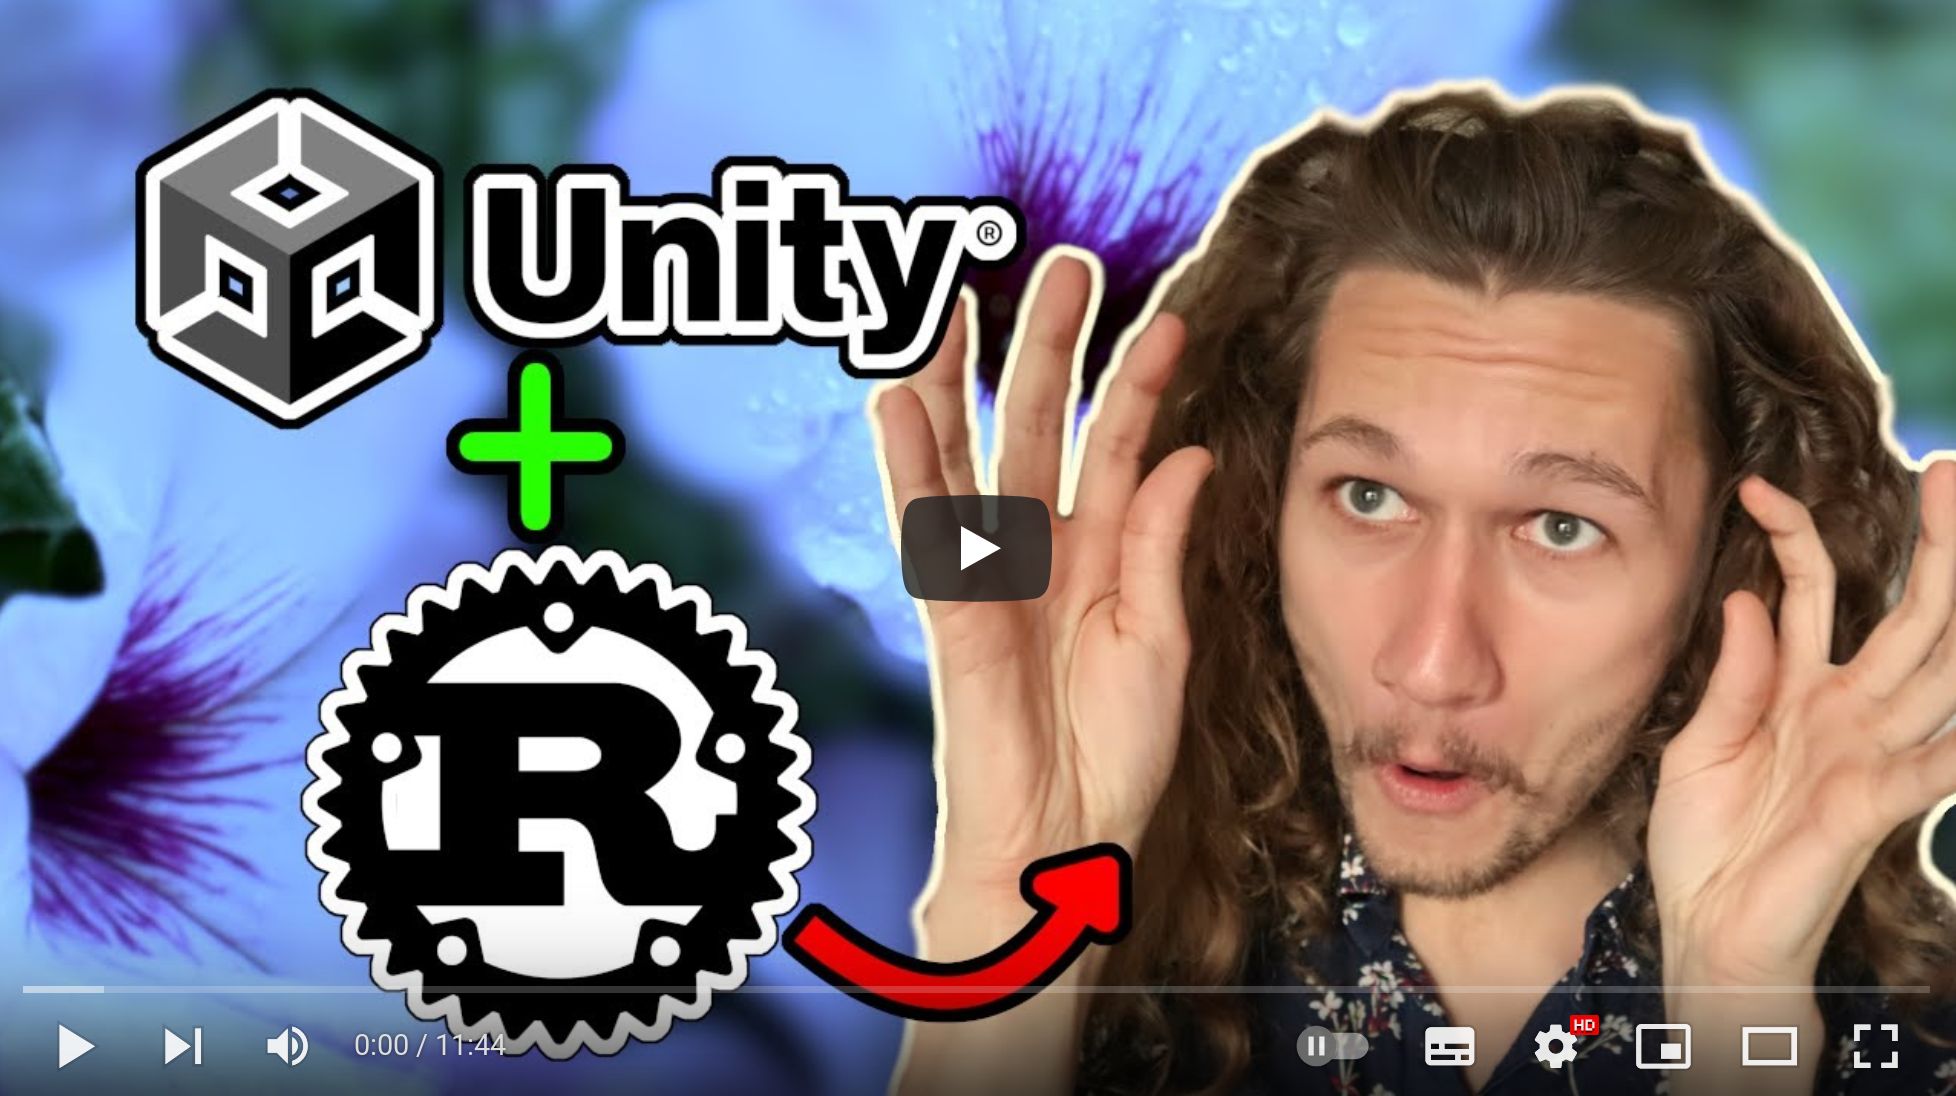 Silly Youtube preview: TanTan's photo, Rust&Unity logos